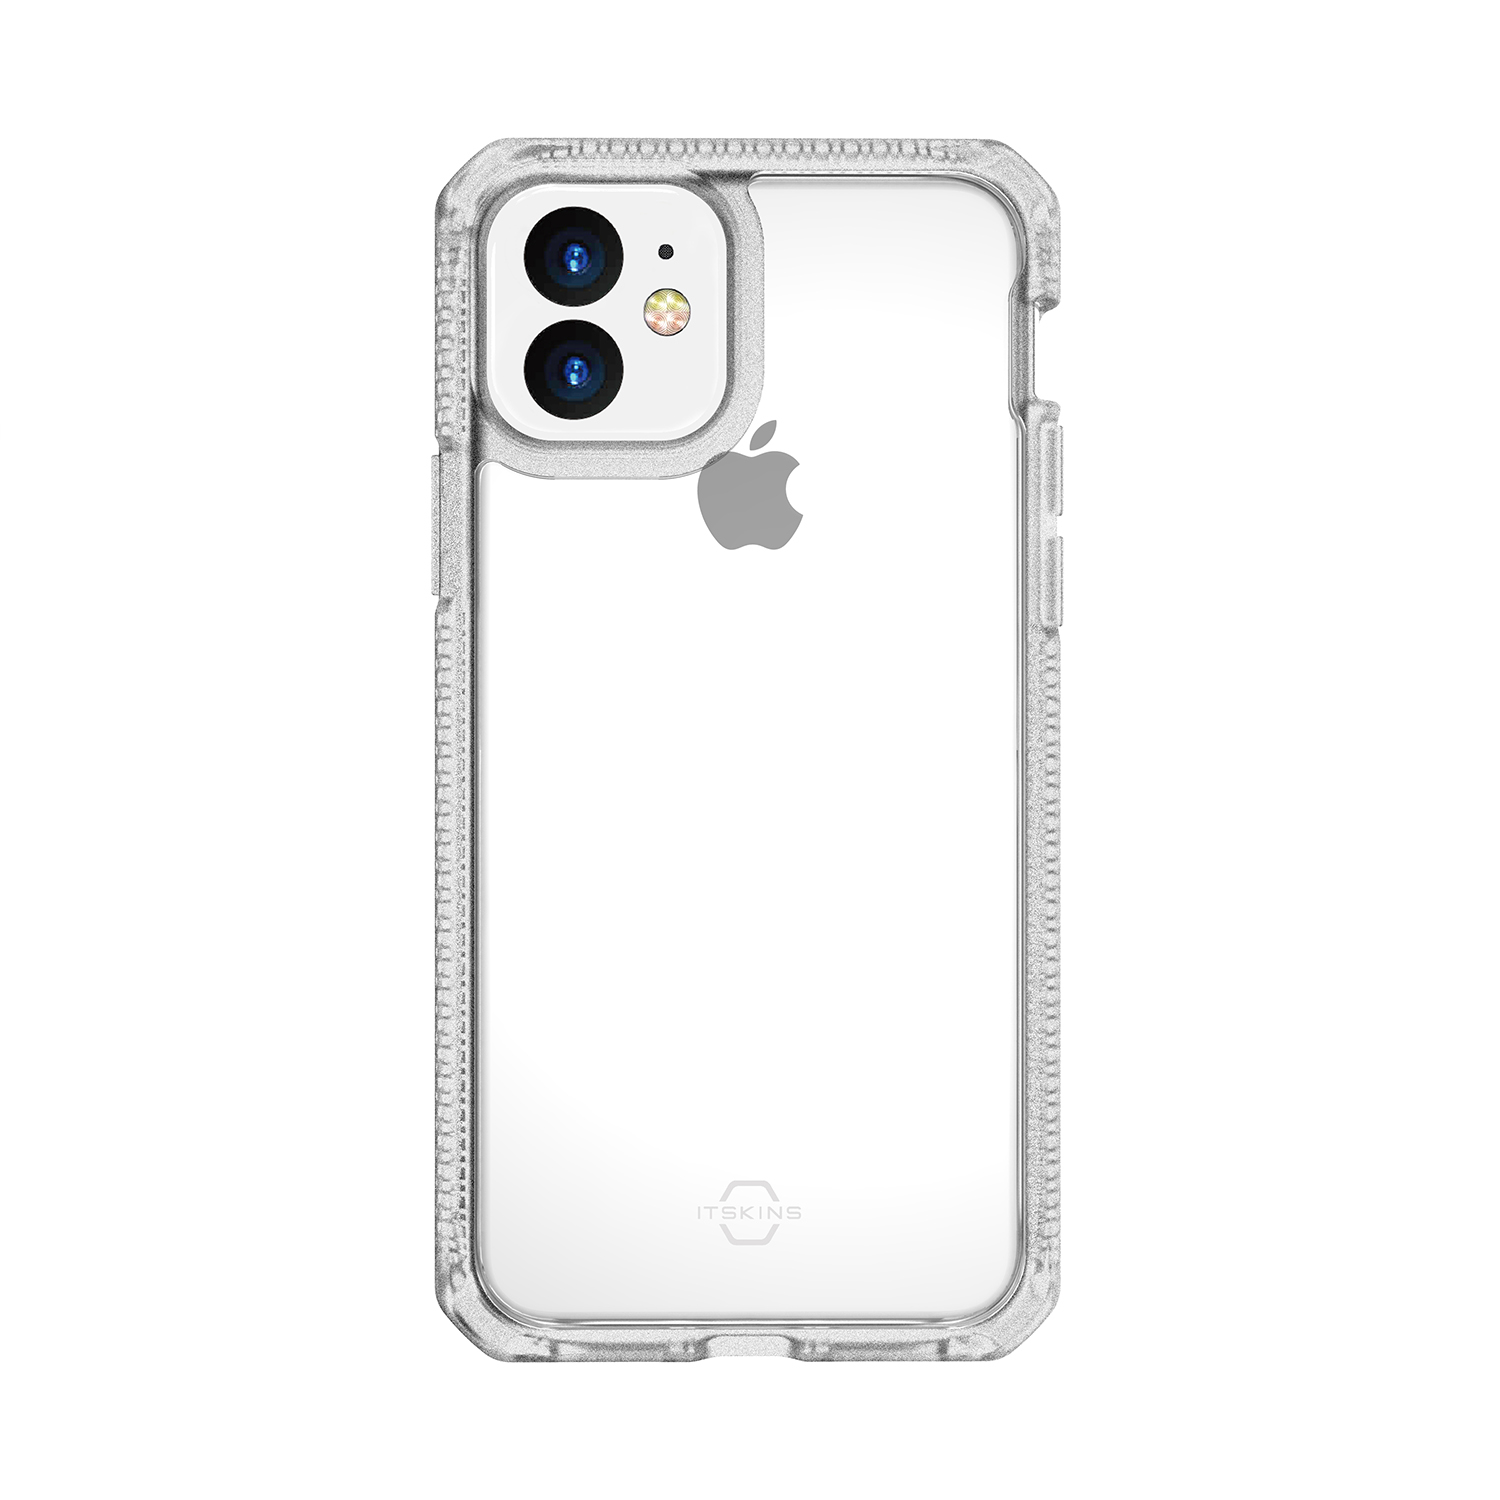 ITSKINS Hybrid Frost Case for iPhone 11, 11 Pro & 11 Pro Max